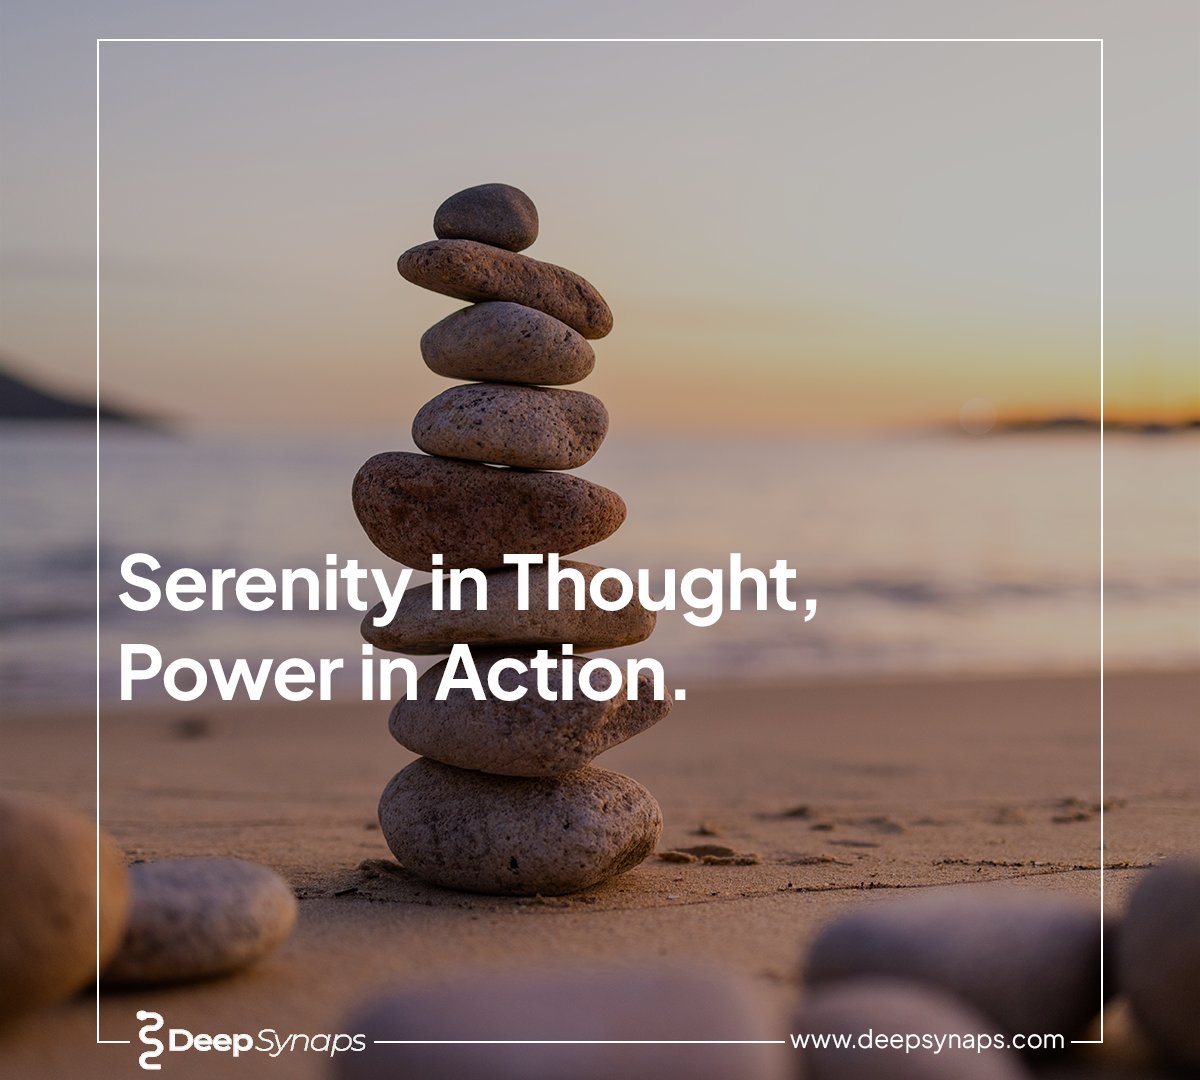 Balance mind and action with #DeepSynaps. 🧠✨ Serenity in thought leads to power in action. Join us in redefining cognitive health. #CognitiveHarmony #MindfulPower #InnovateYourMind

👉 Find out more: deepsynaps.com